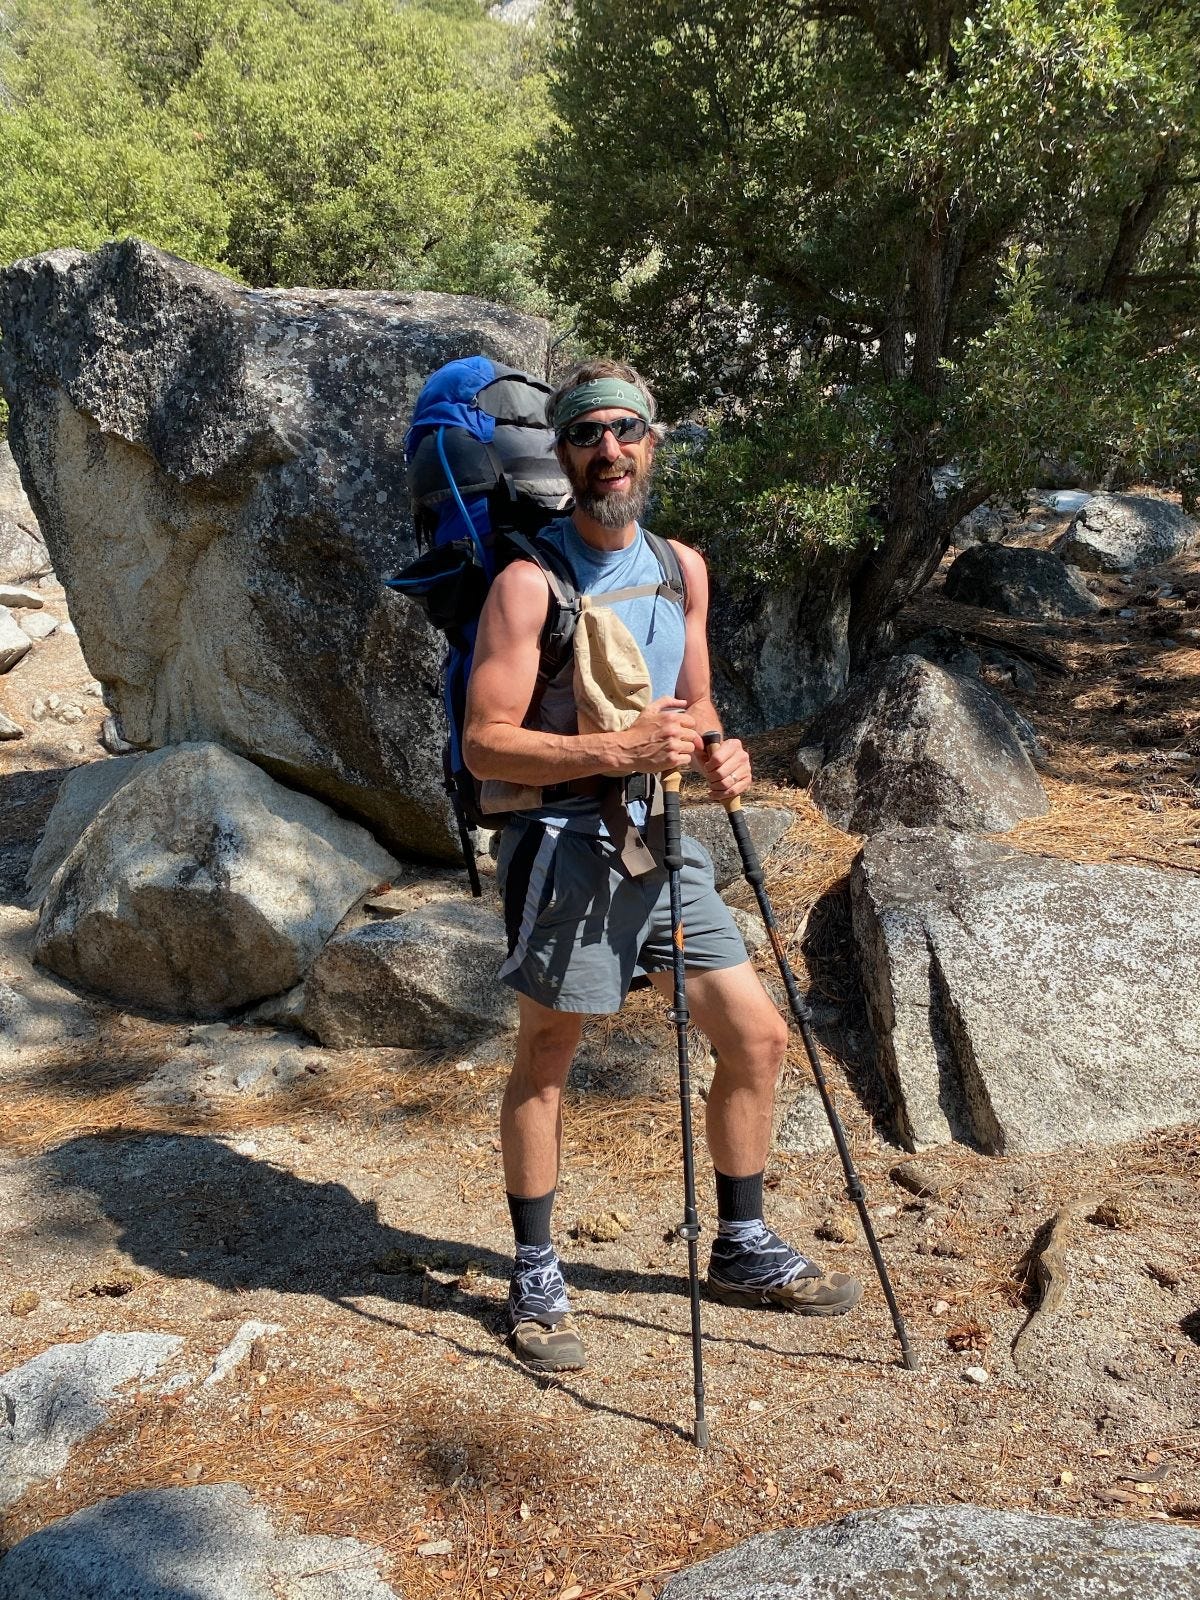 Scott standing at the start of his trail with a full backpack, hiking sticks, and a smile.